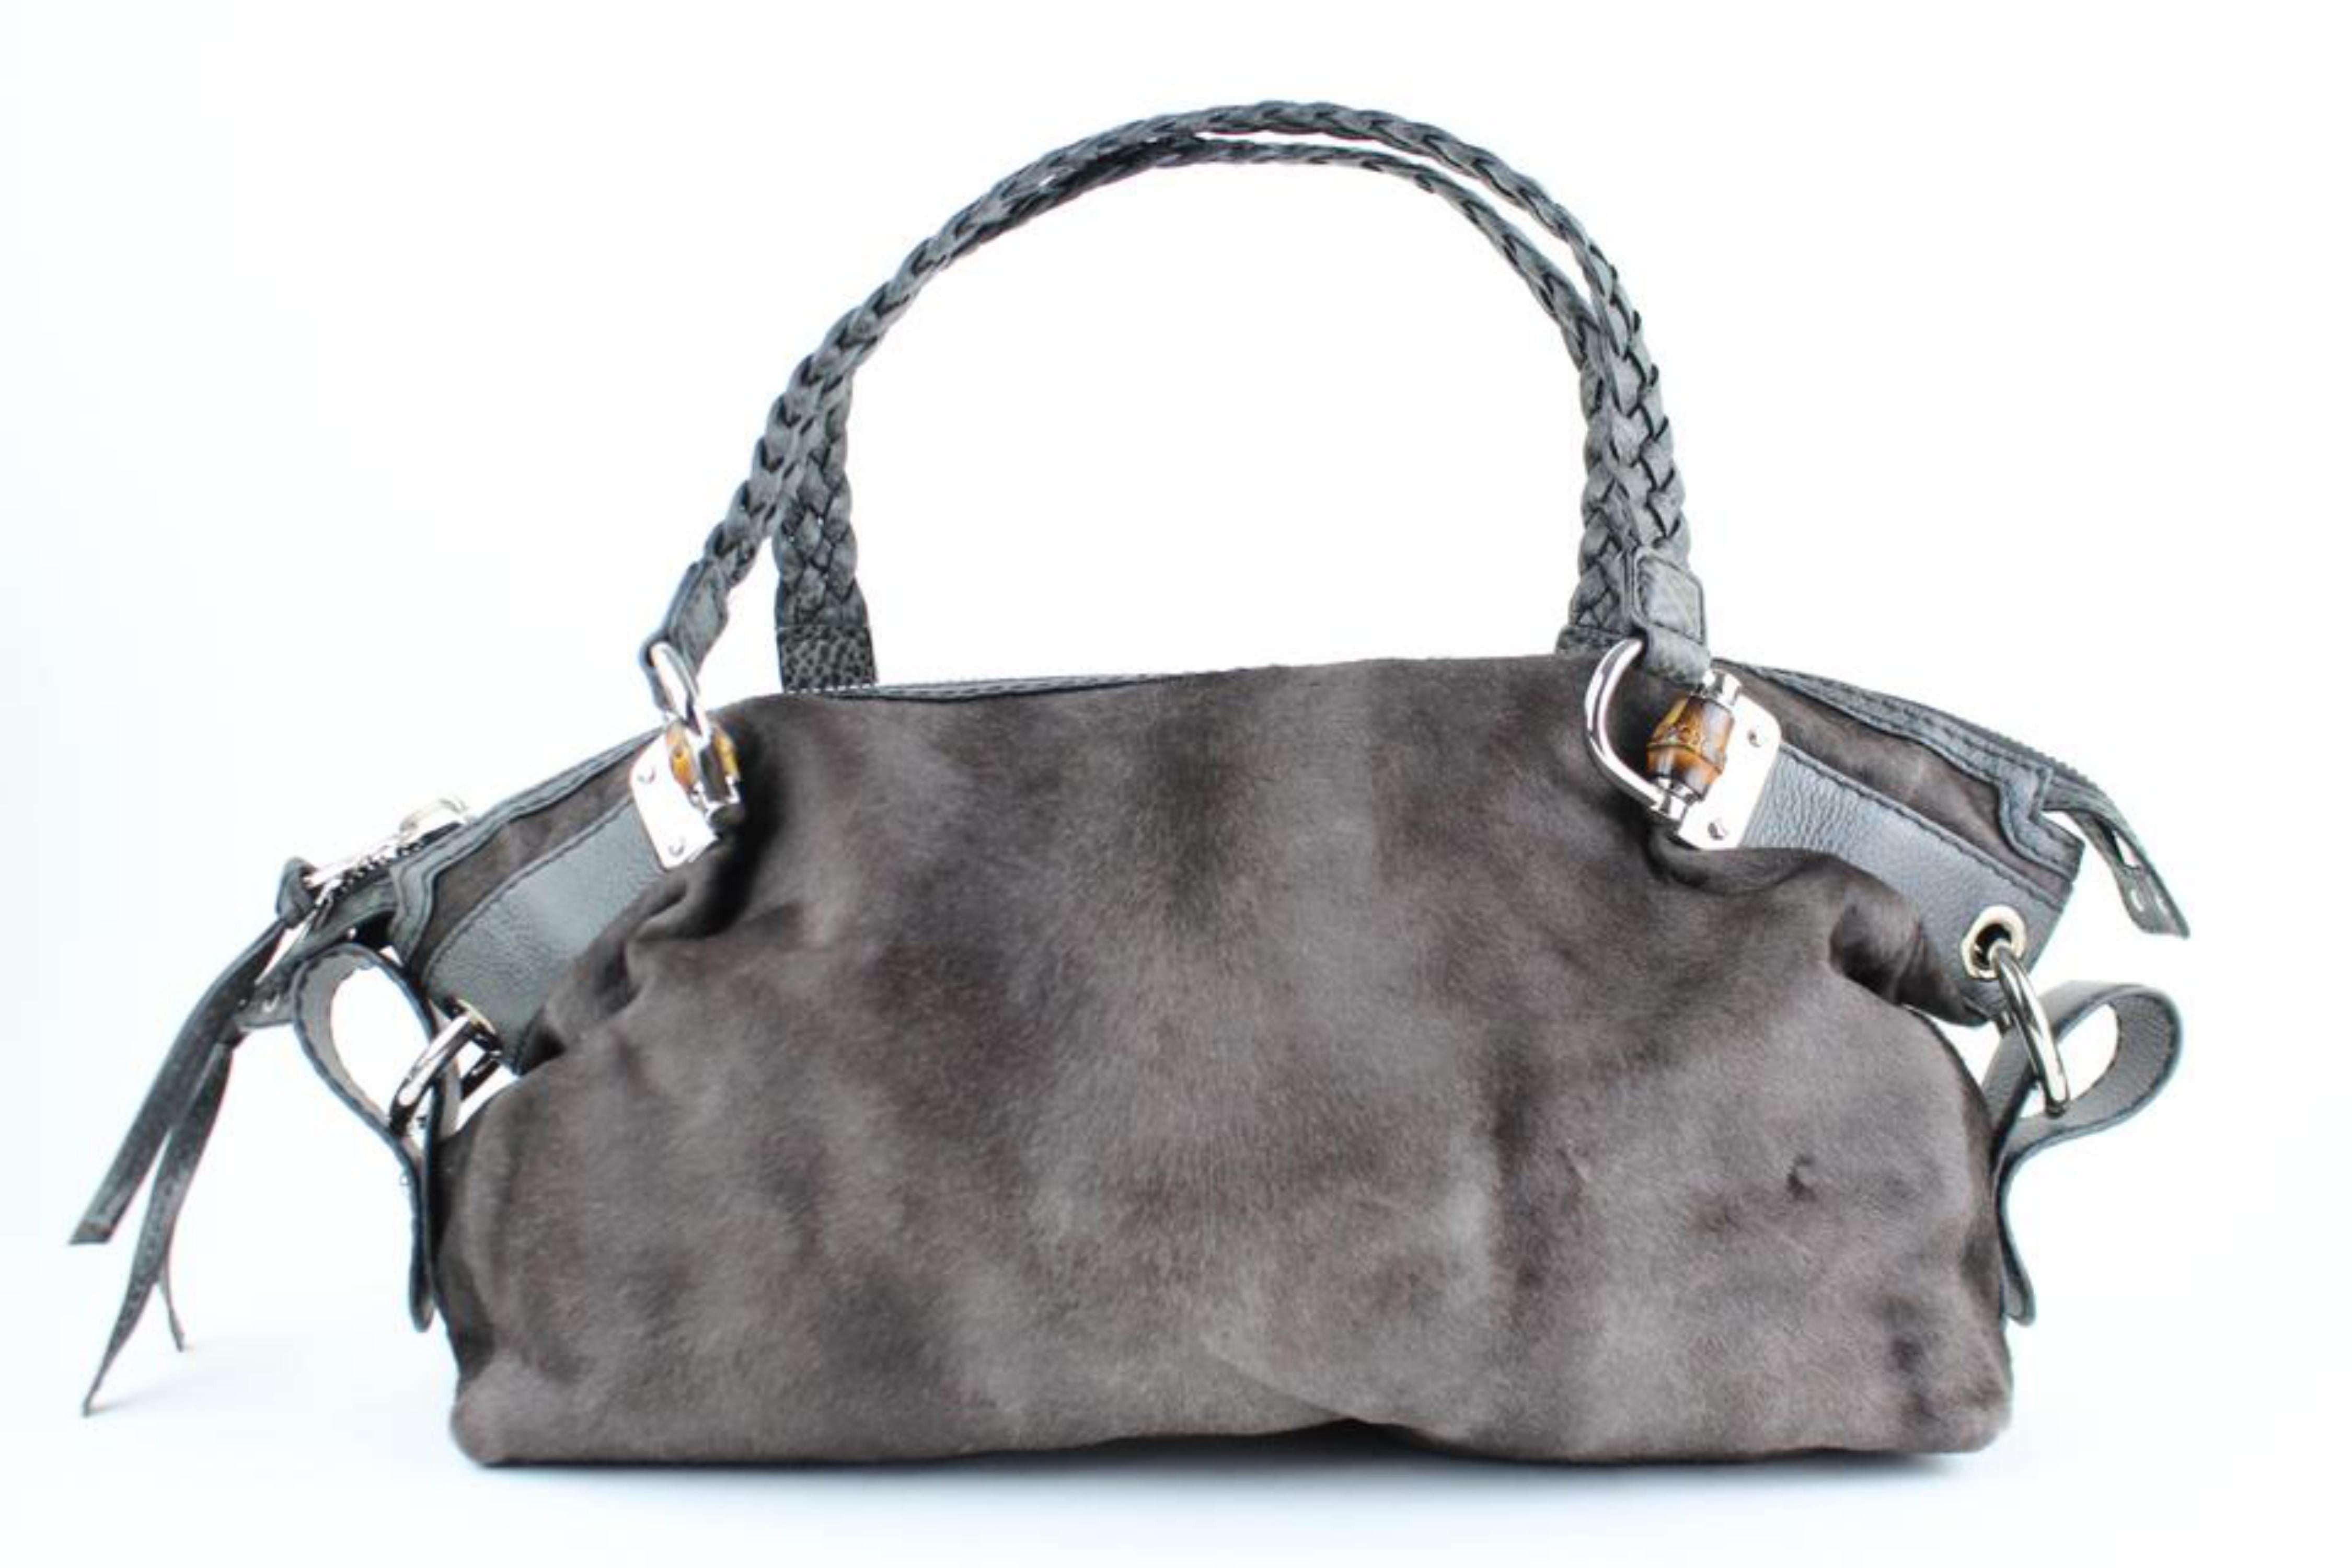 Gucci Hair Woven Handle Tote 824gt16 Grey Pony Fur Shoulder Bag For Sale 5